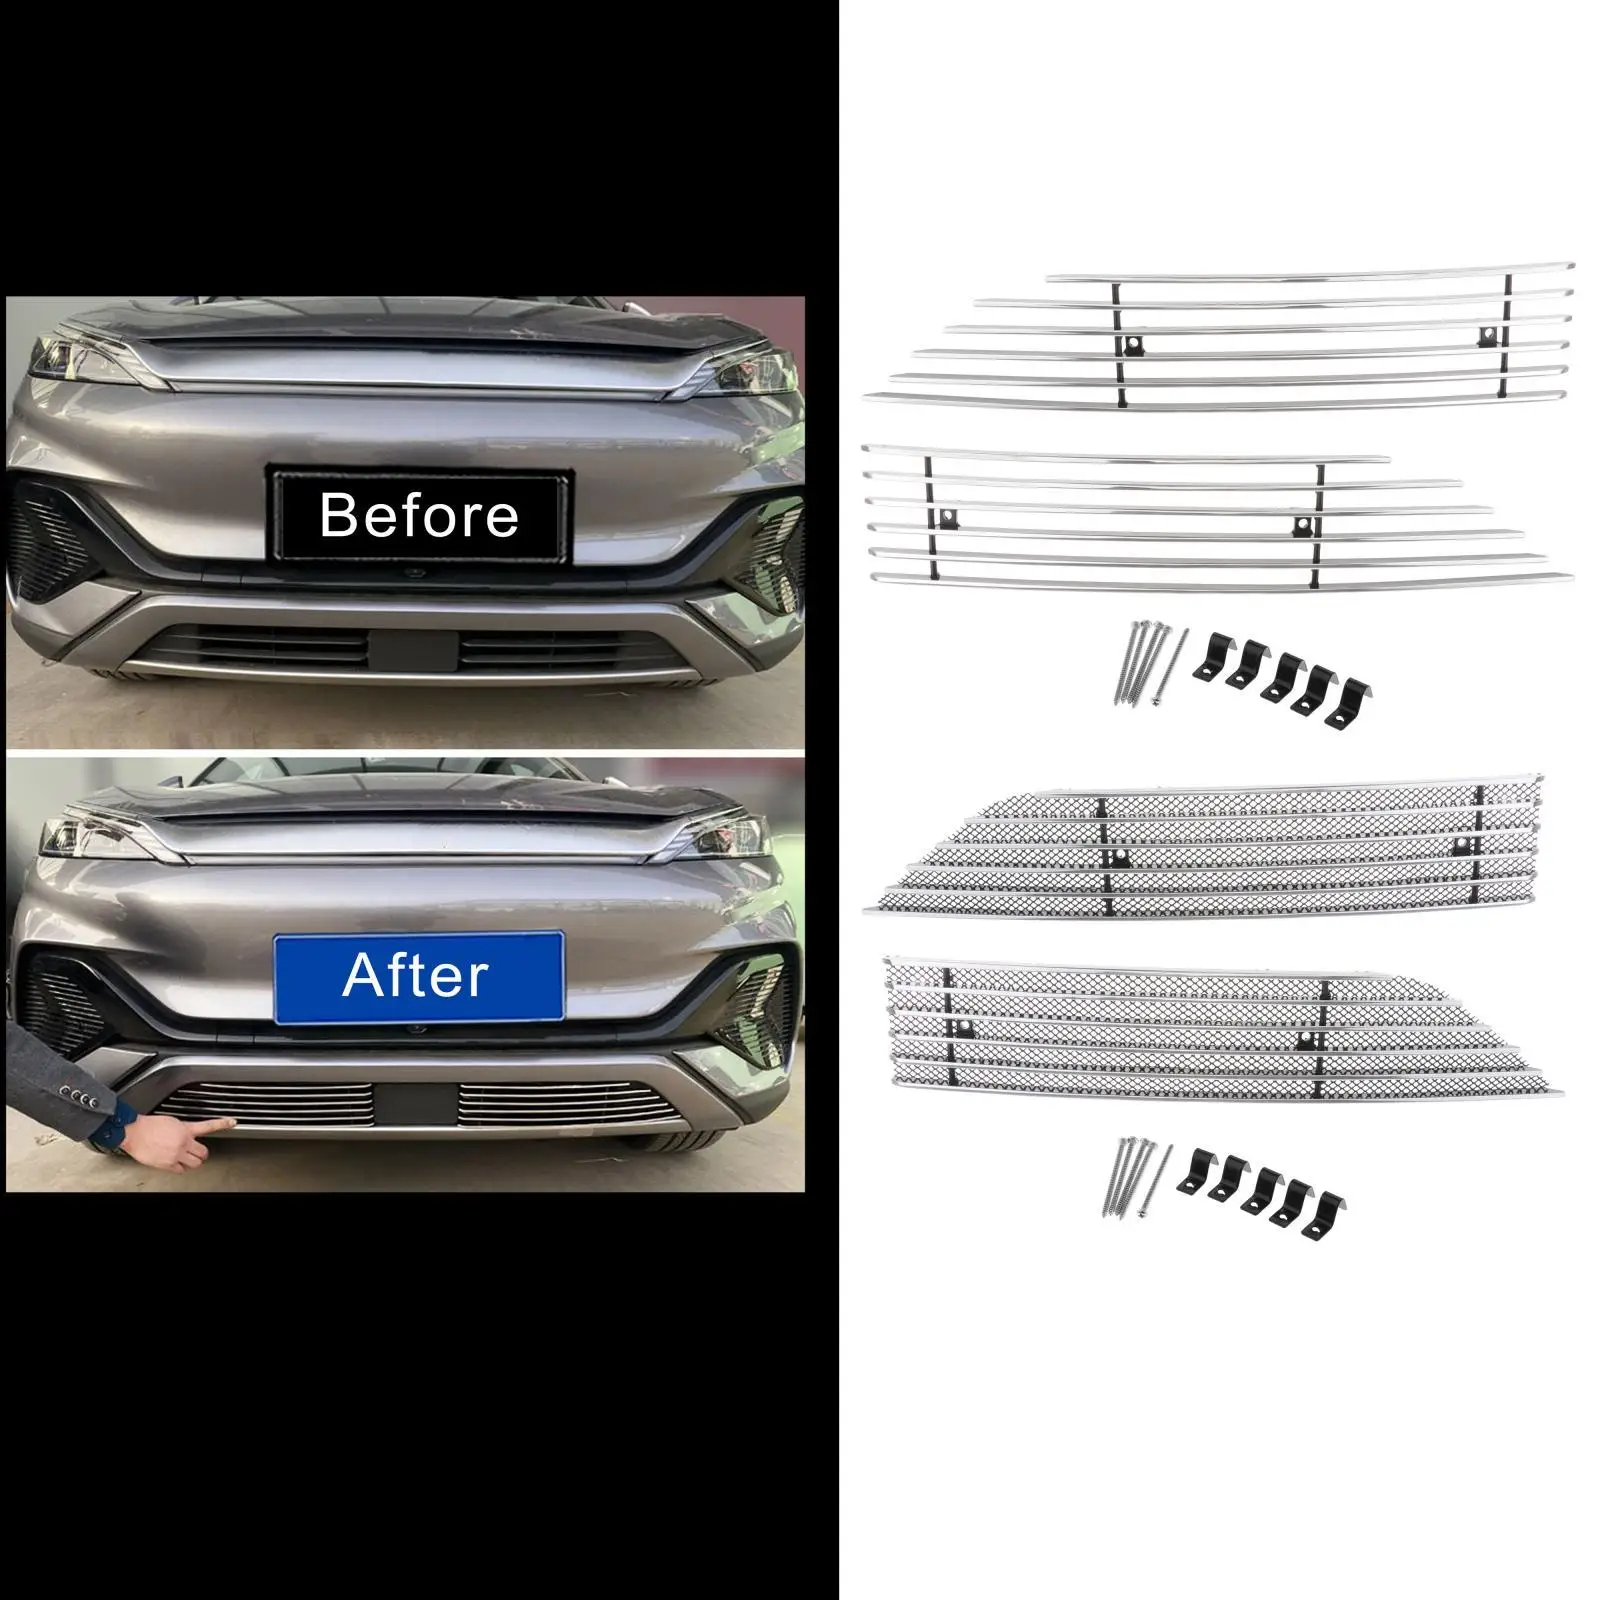 2x Auto Front Lower Grill Grille Cover Trims Sturdy for Byd Atto 3 Yuan Plus